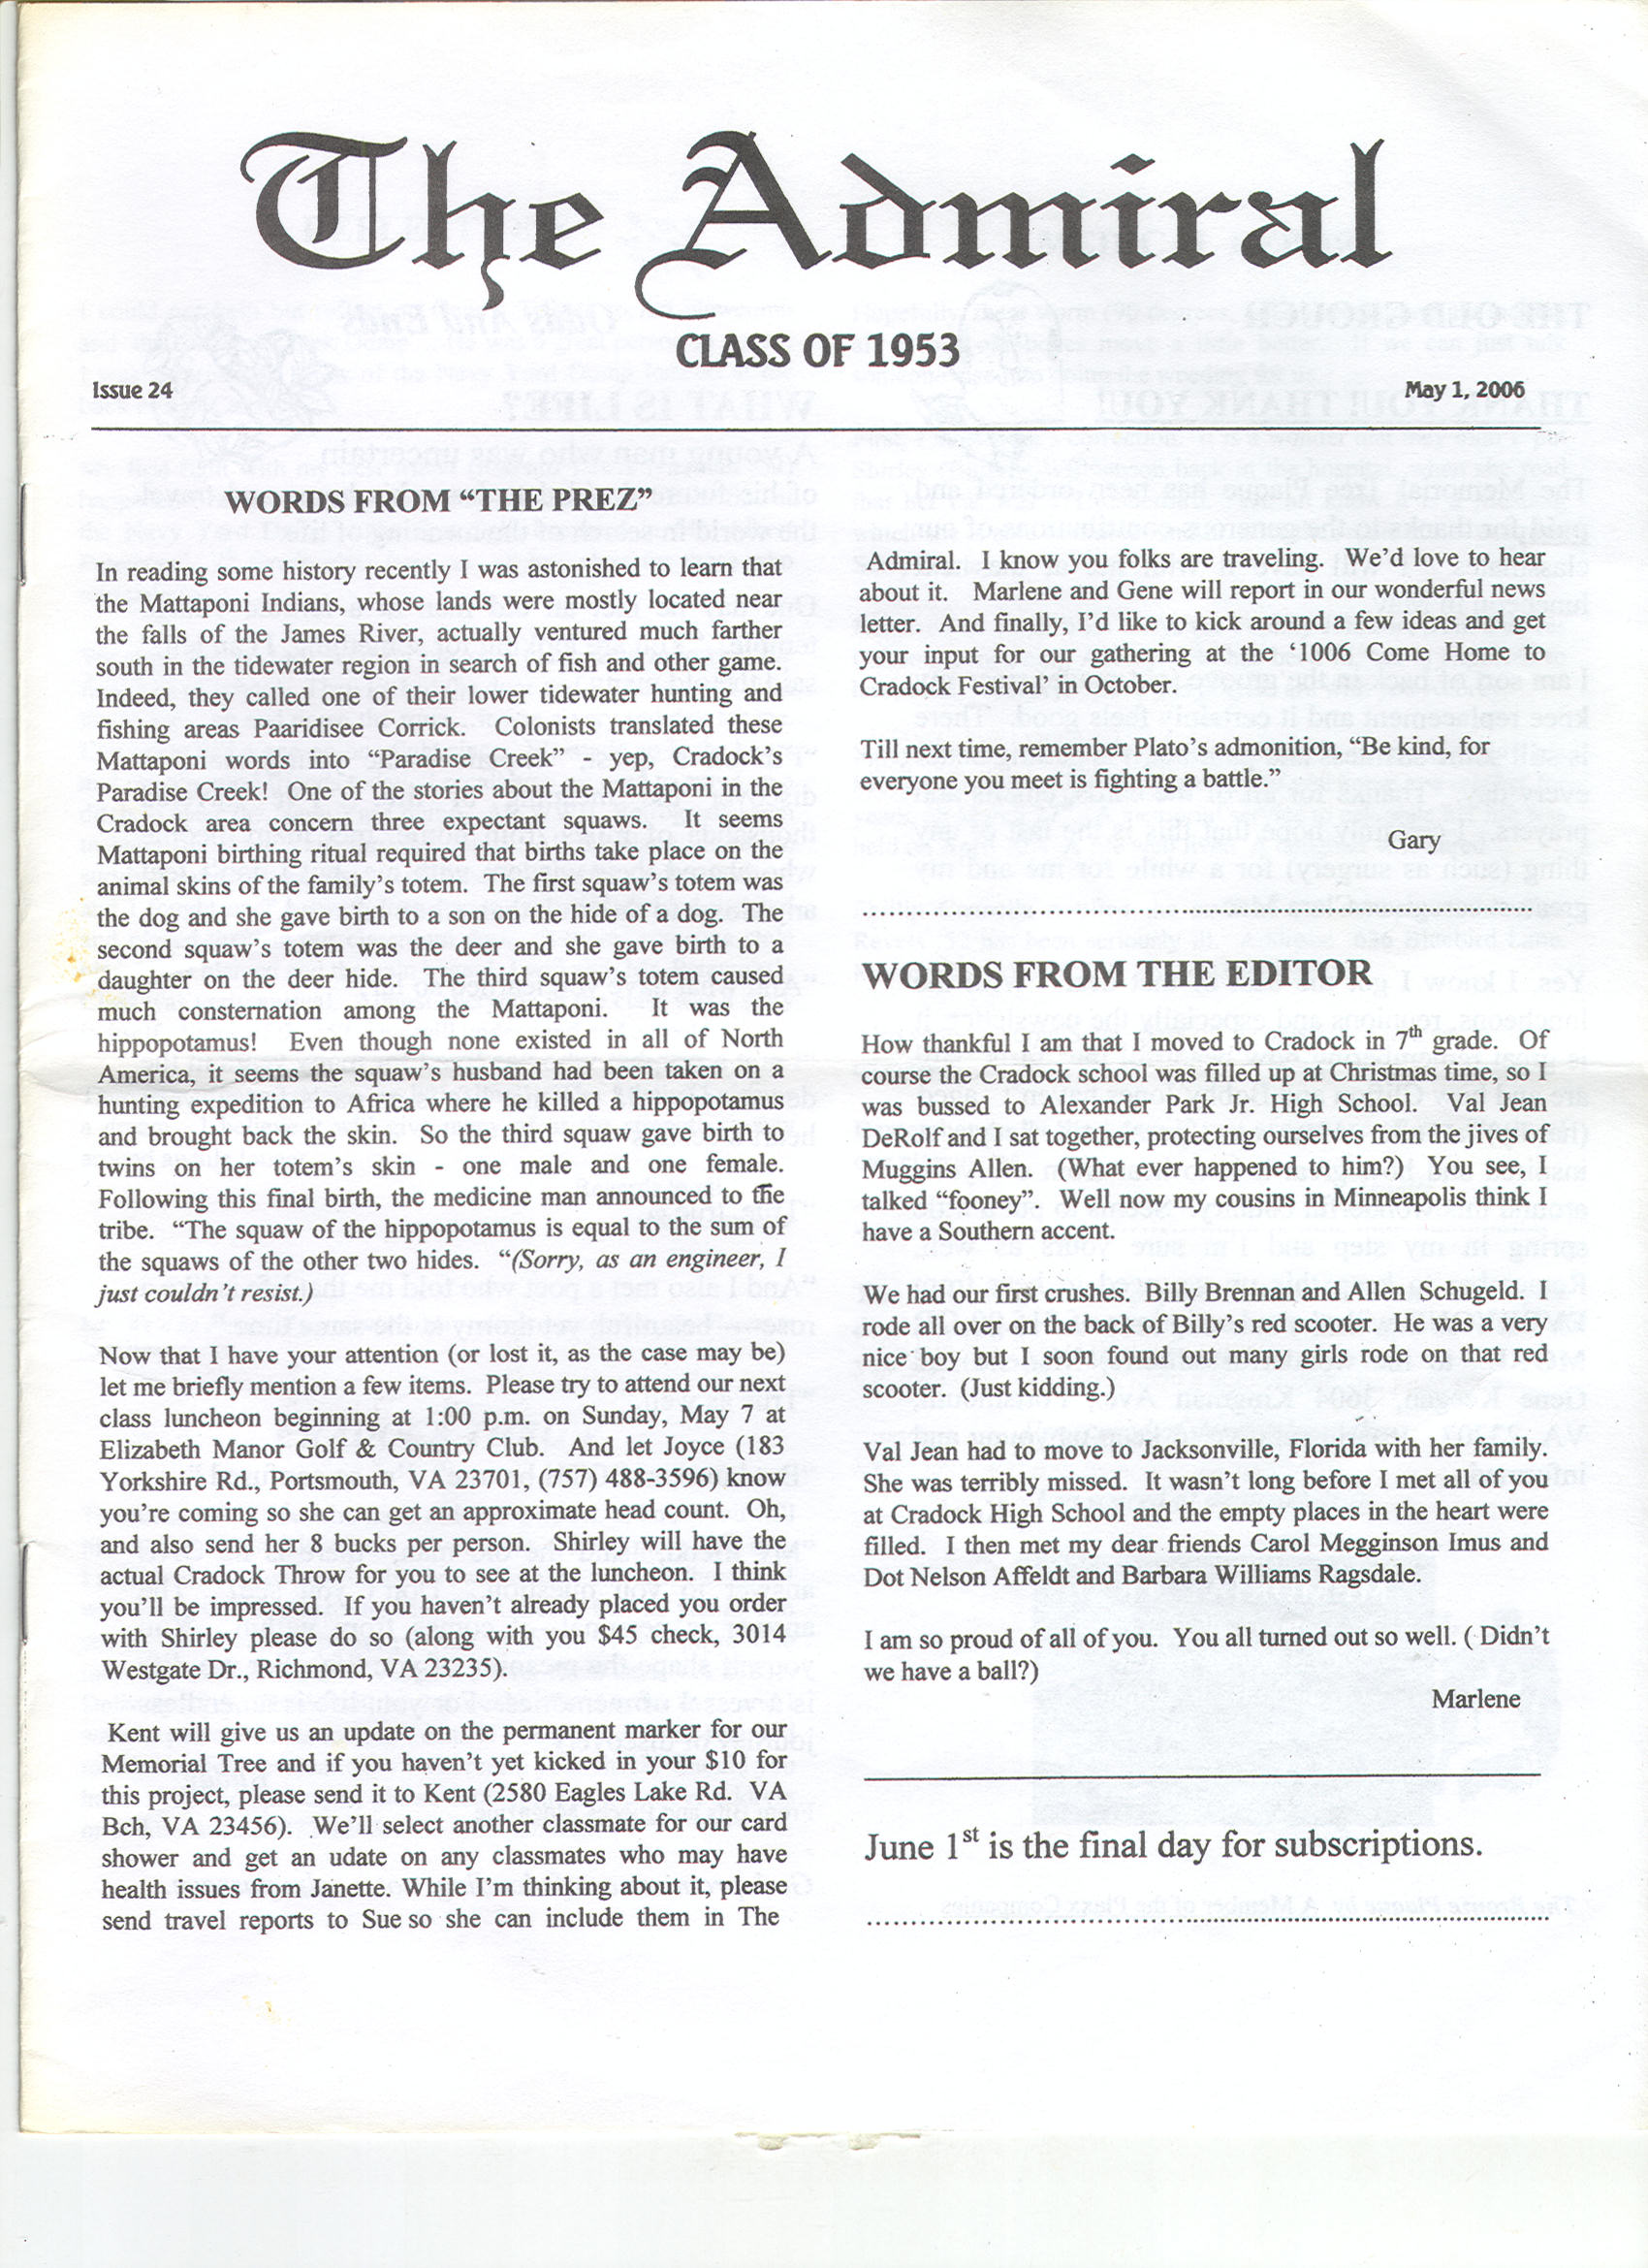 The Admiral - May 2006 - pg. 1